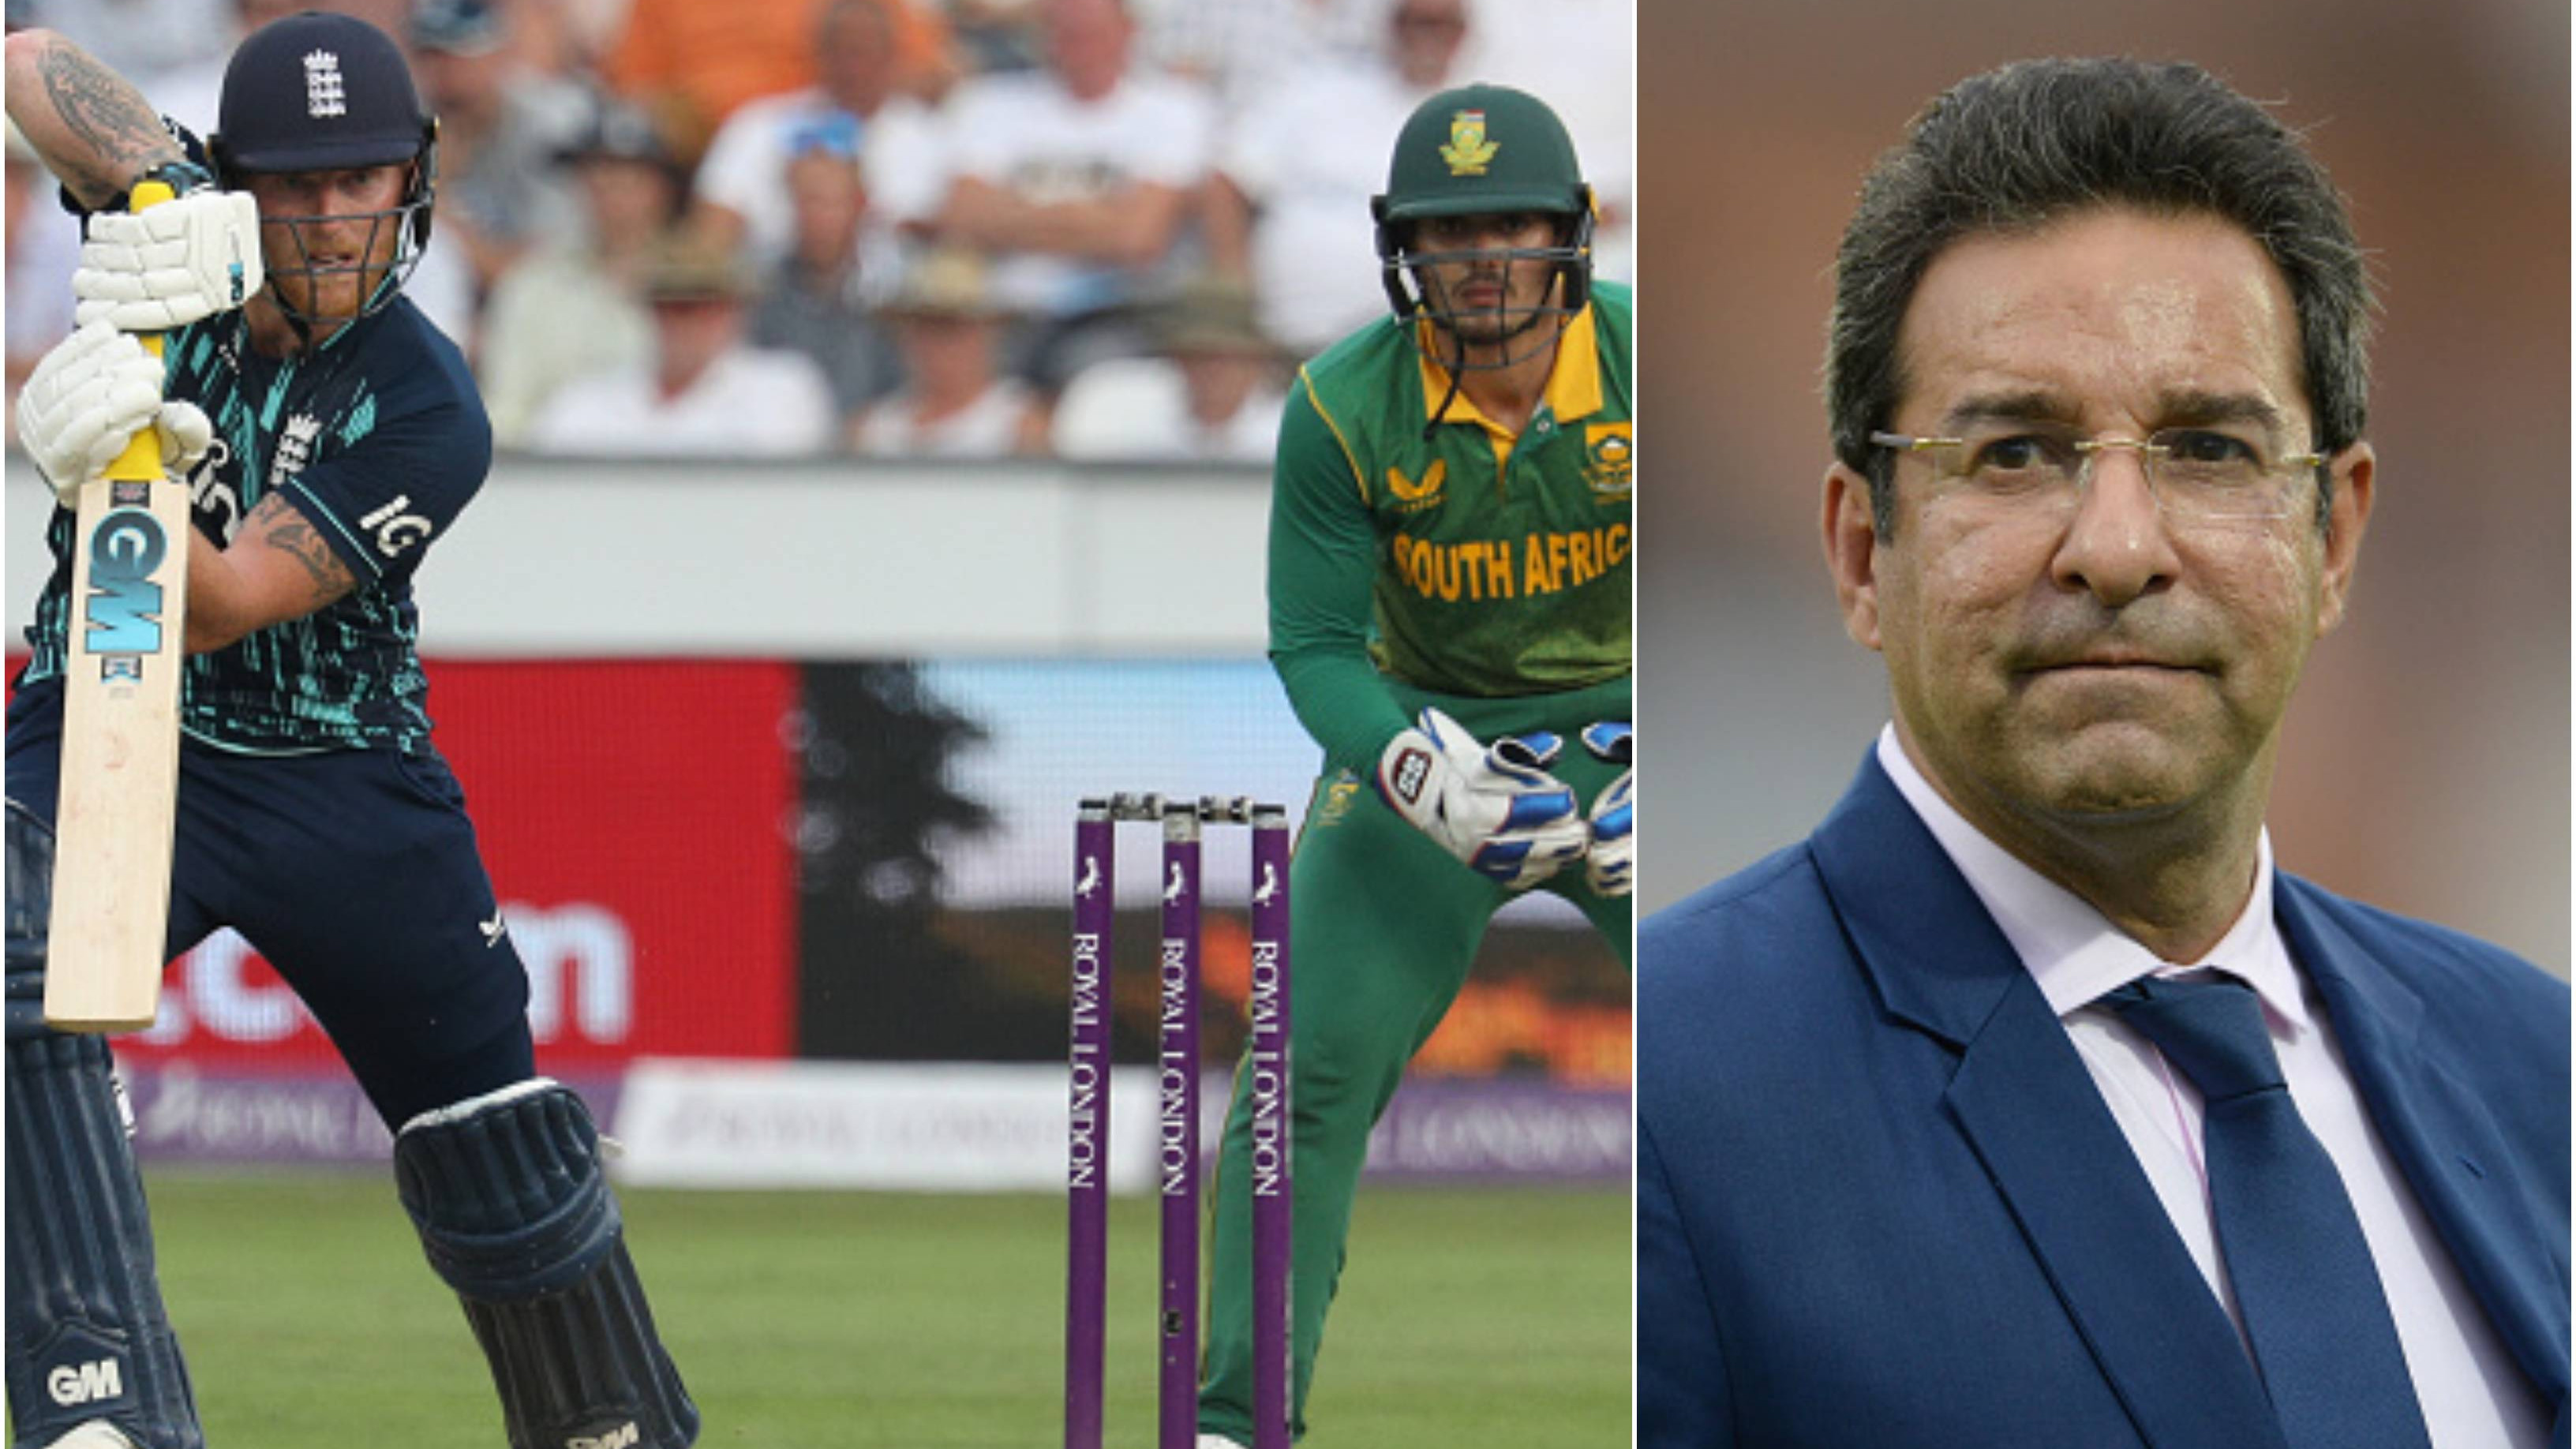 “One-day cricket is kind of dying”, Wasim Akram expresses his concerns over the 50-over format